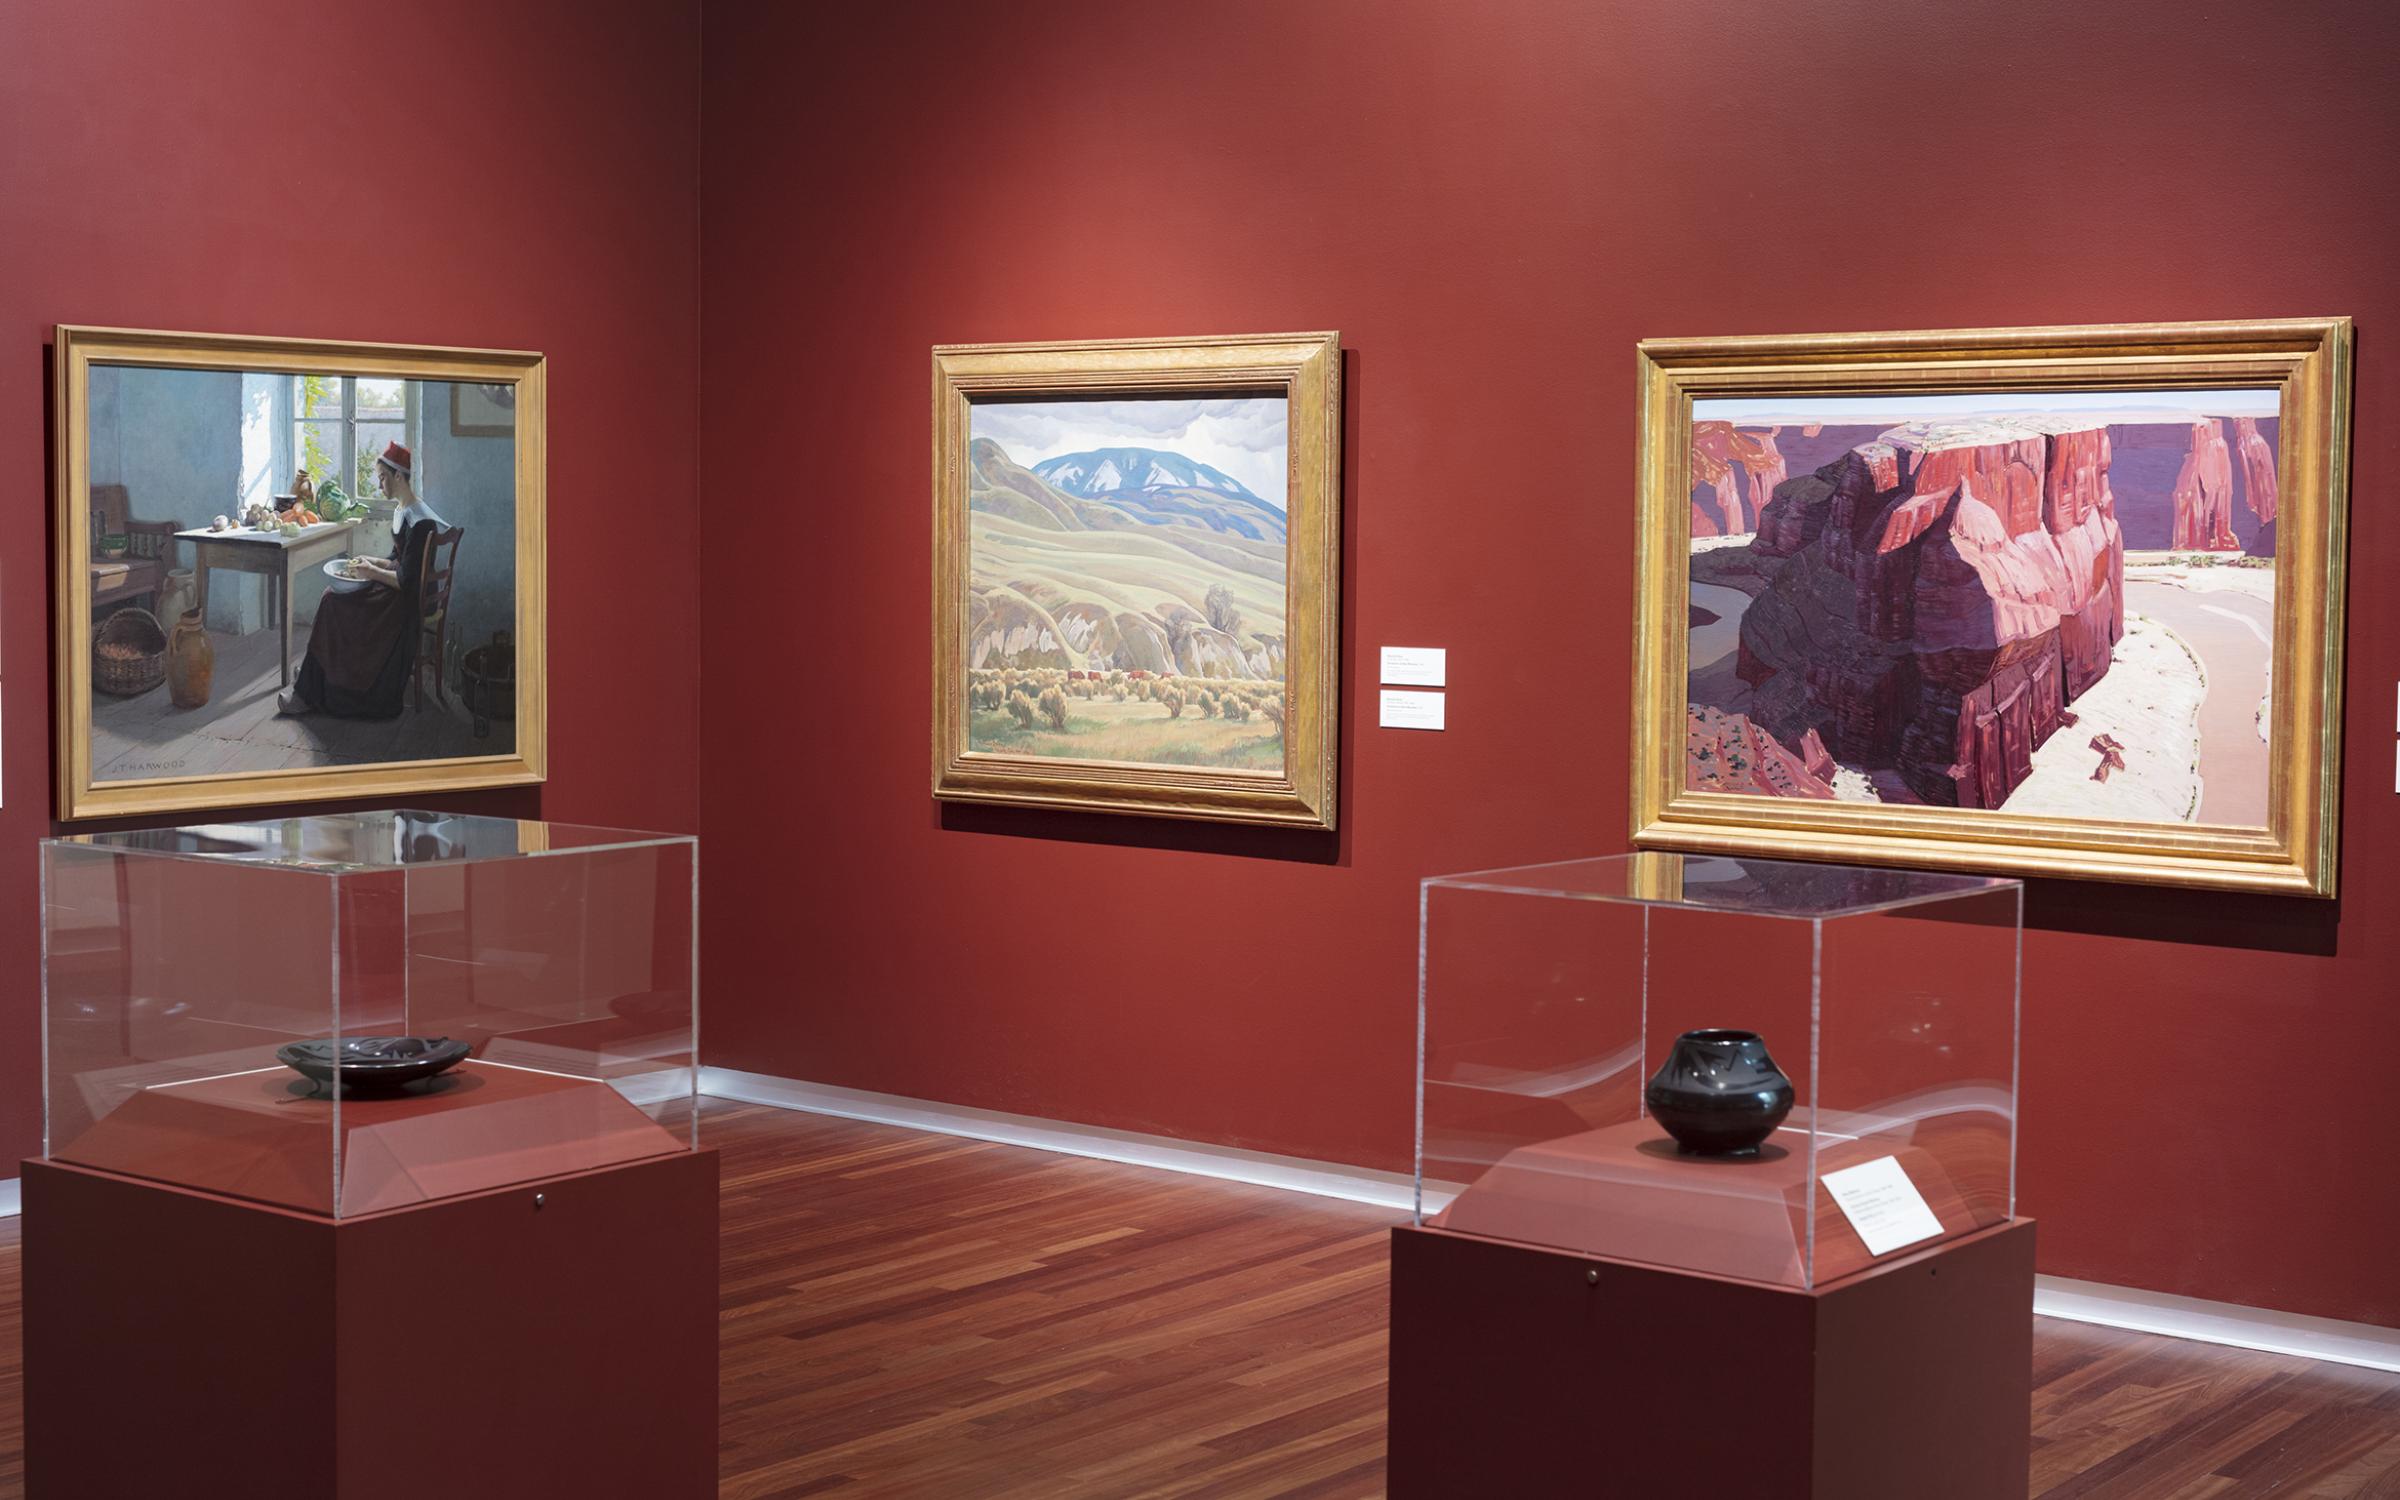 Three framed paintings line the burgundy-colored walls in the background. There are two dark pieces of pottery in separate glass display cases on similarly colored stands in the middle of the room.